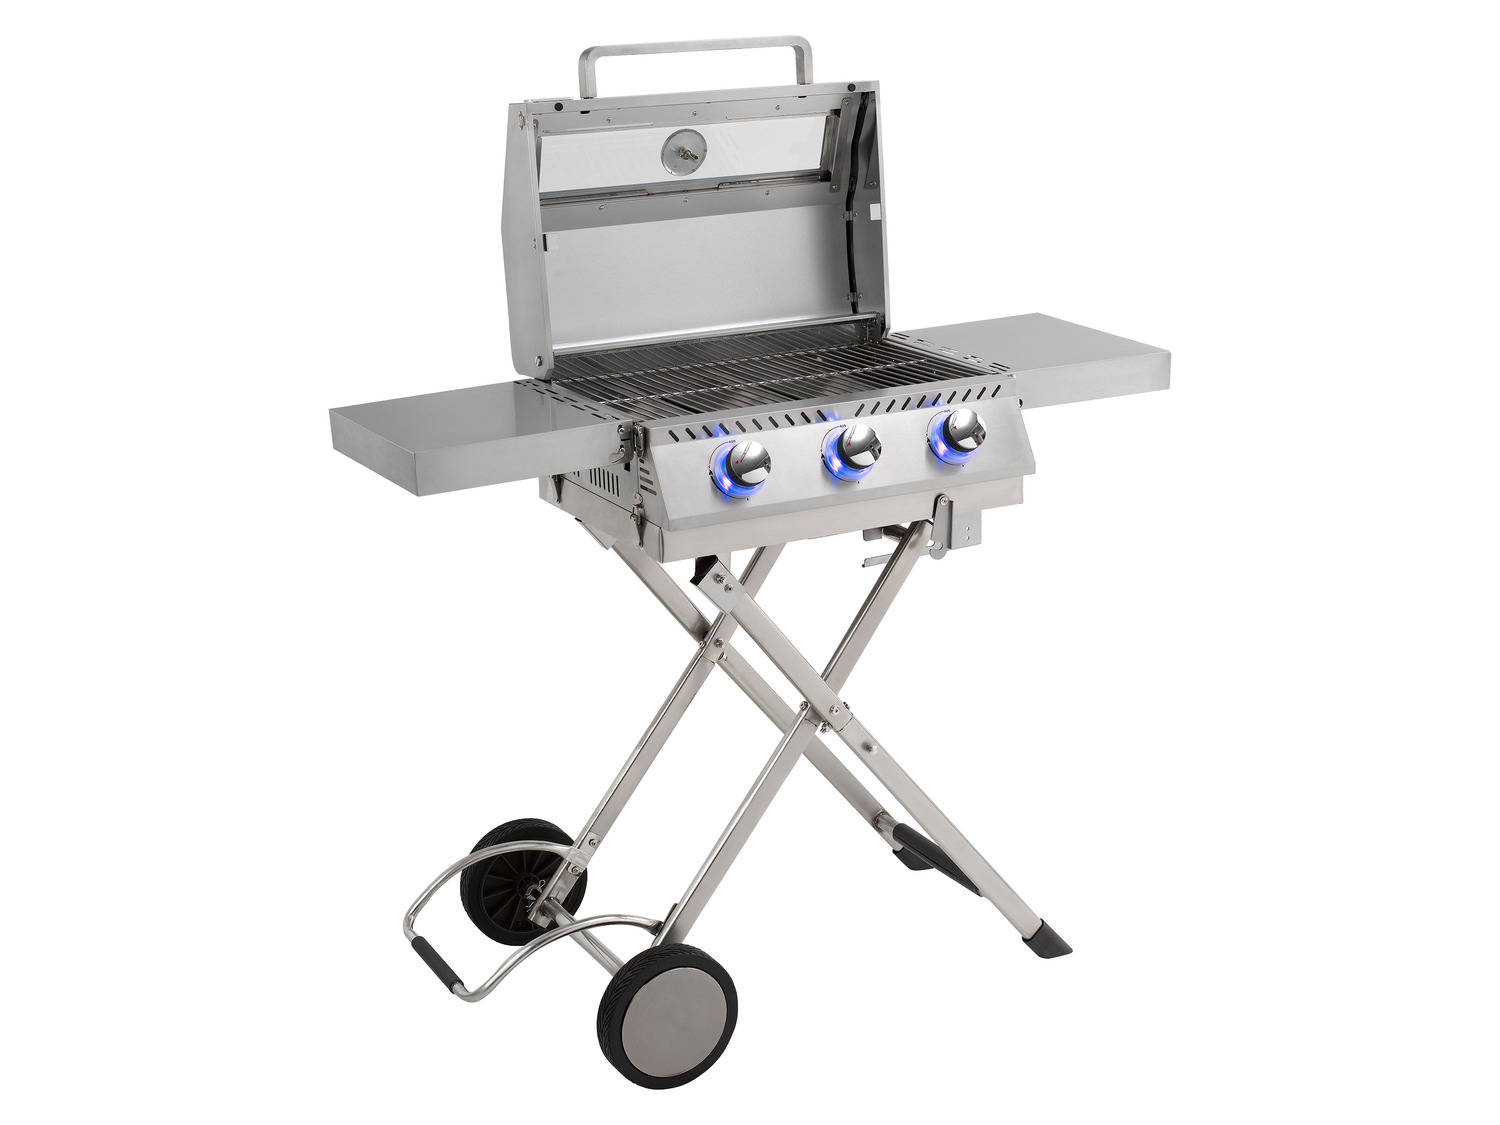 tepro Gasgrill »Chicago« Special Edition, 3 Brenner, 9…